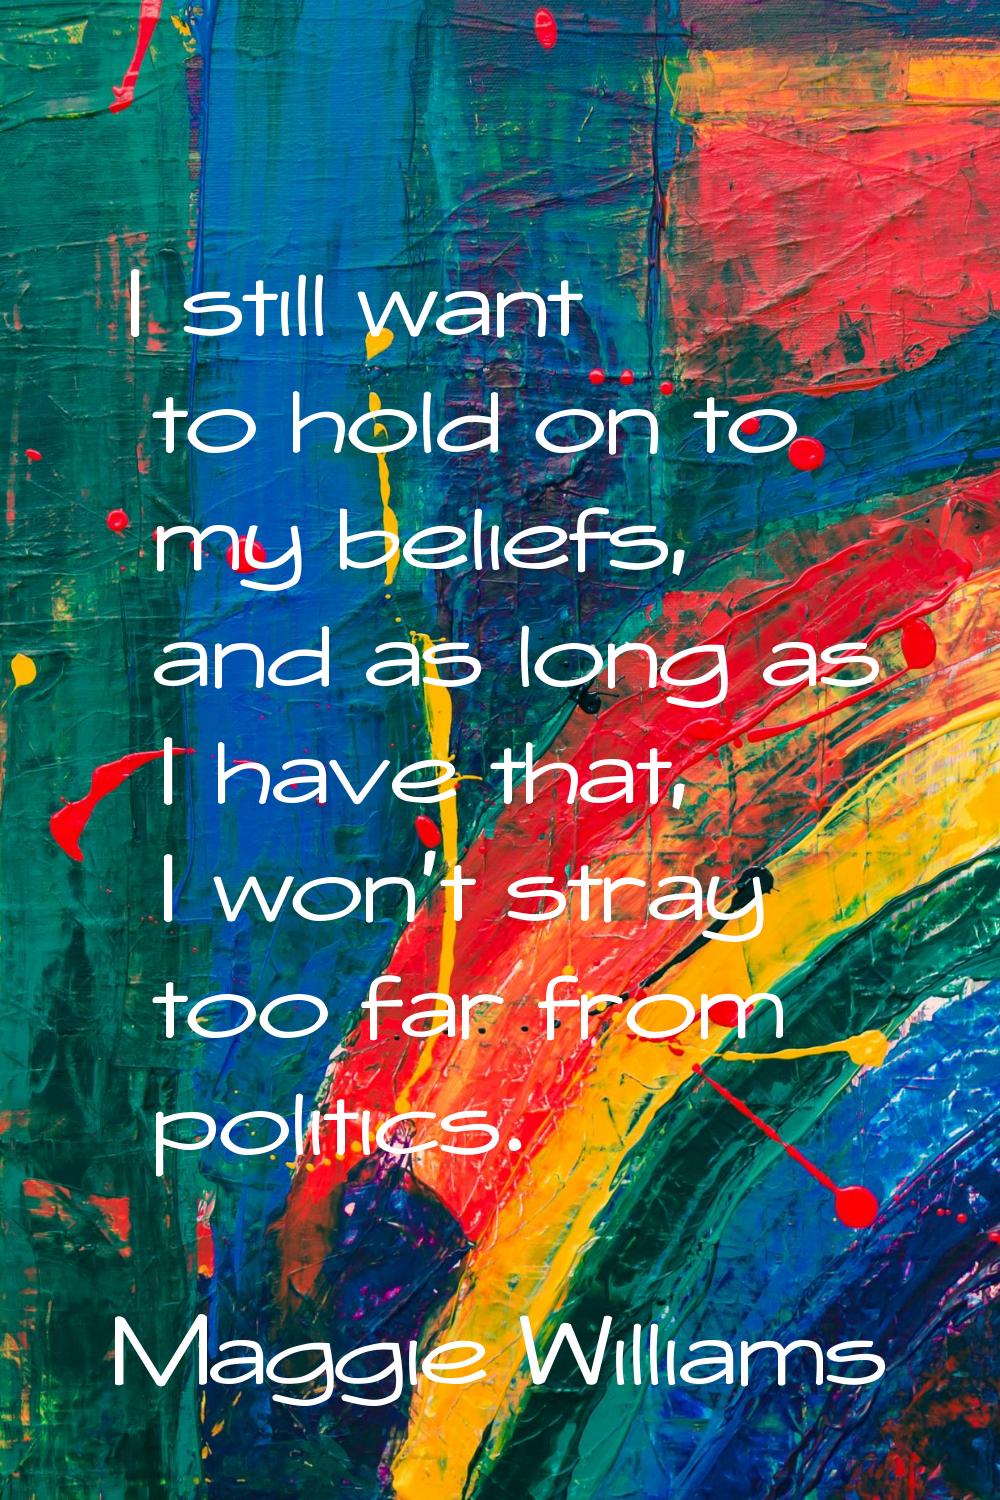 I still want to hold on to my beliefs, and as long as I have that, I won't stray too far from polit